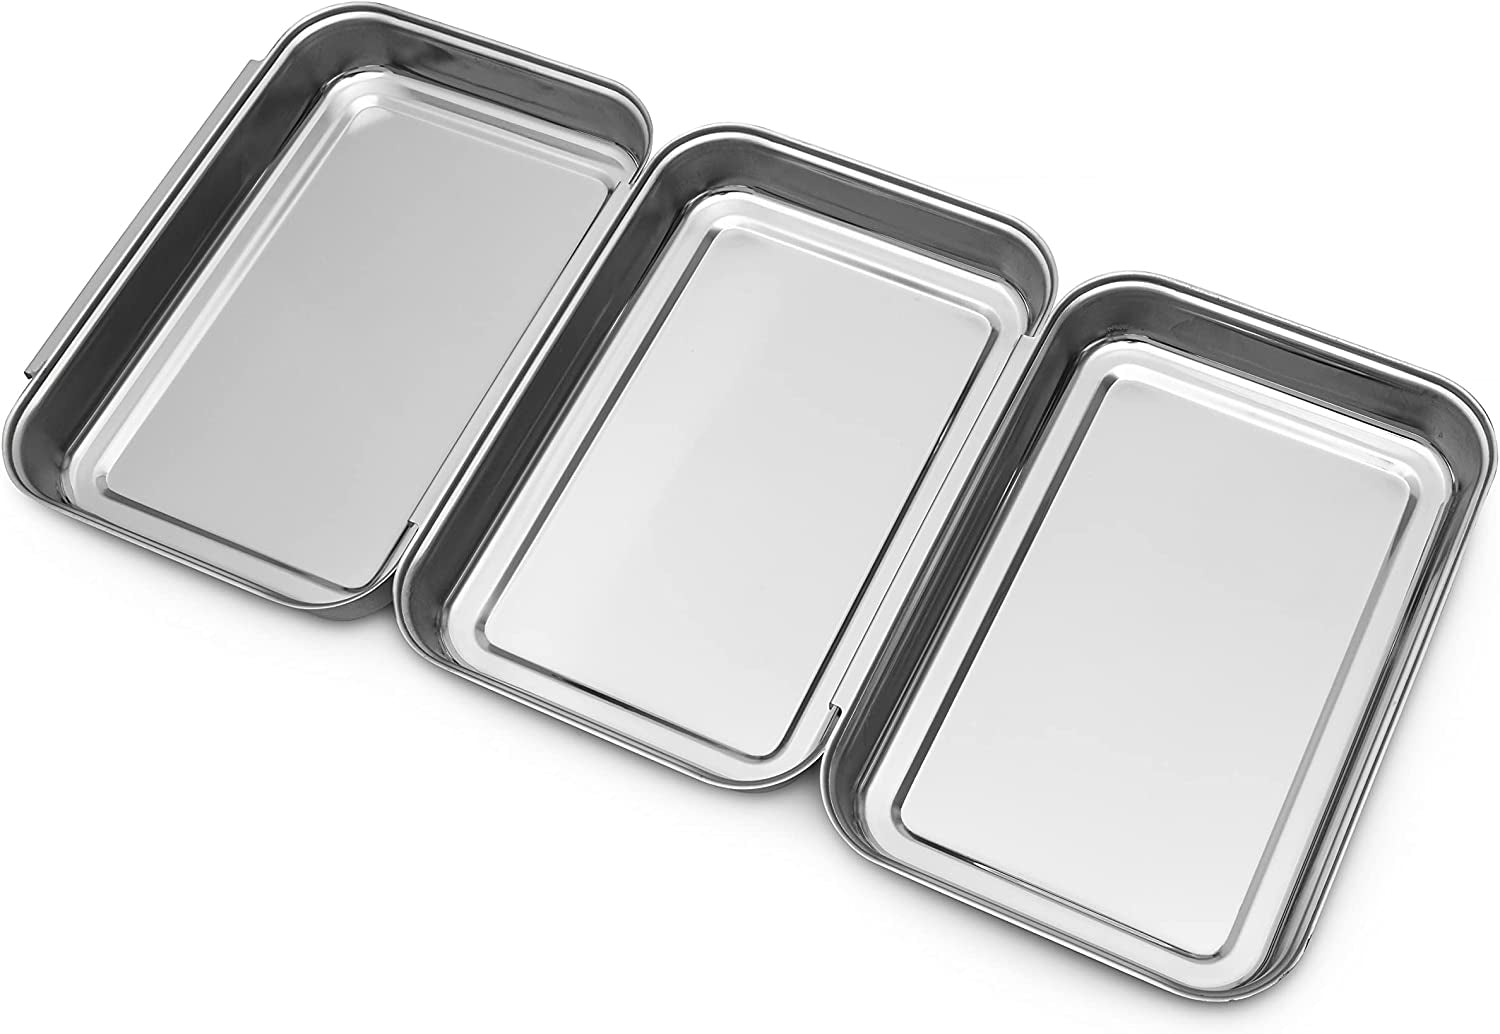 3 Piece Breading Tray Set - Stainless Steel Crumbing Coating Pans with Overlapping Rims - Preparing Dredging Bread Crumb Dishes; Panko, Schnitzel and Fish - with 4 Piece Measuring Spoons